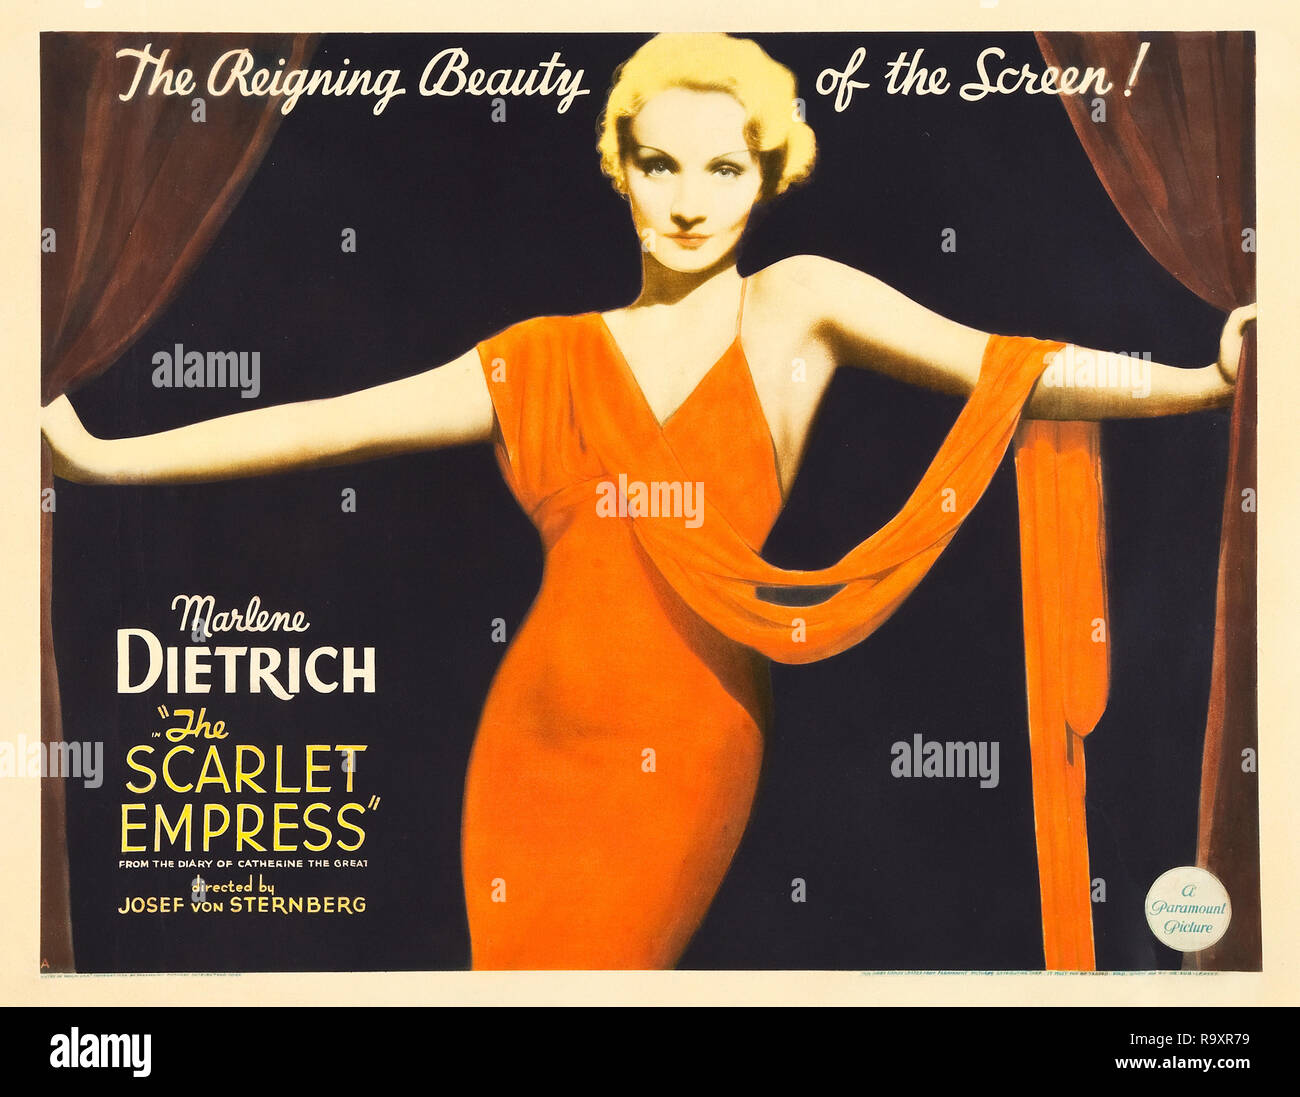 The Scarlet Empress (Paramount, 1934) Poster / Lobby Card  Marlene Dietrich  File Reference # 33635_976THA Stock Photo